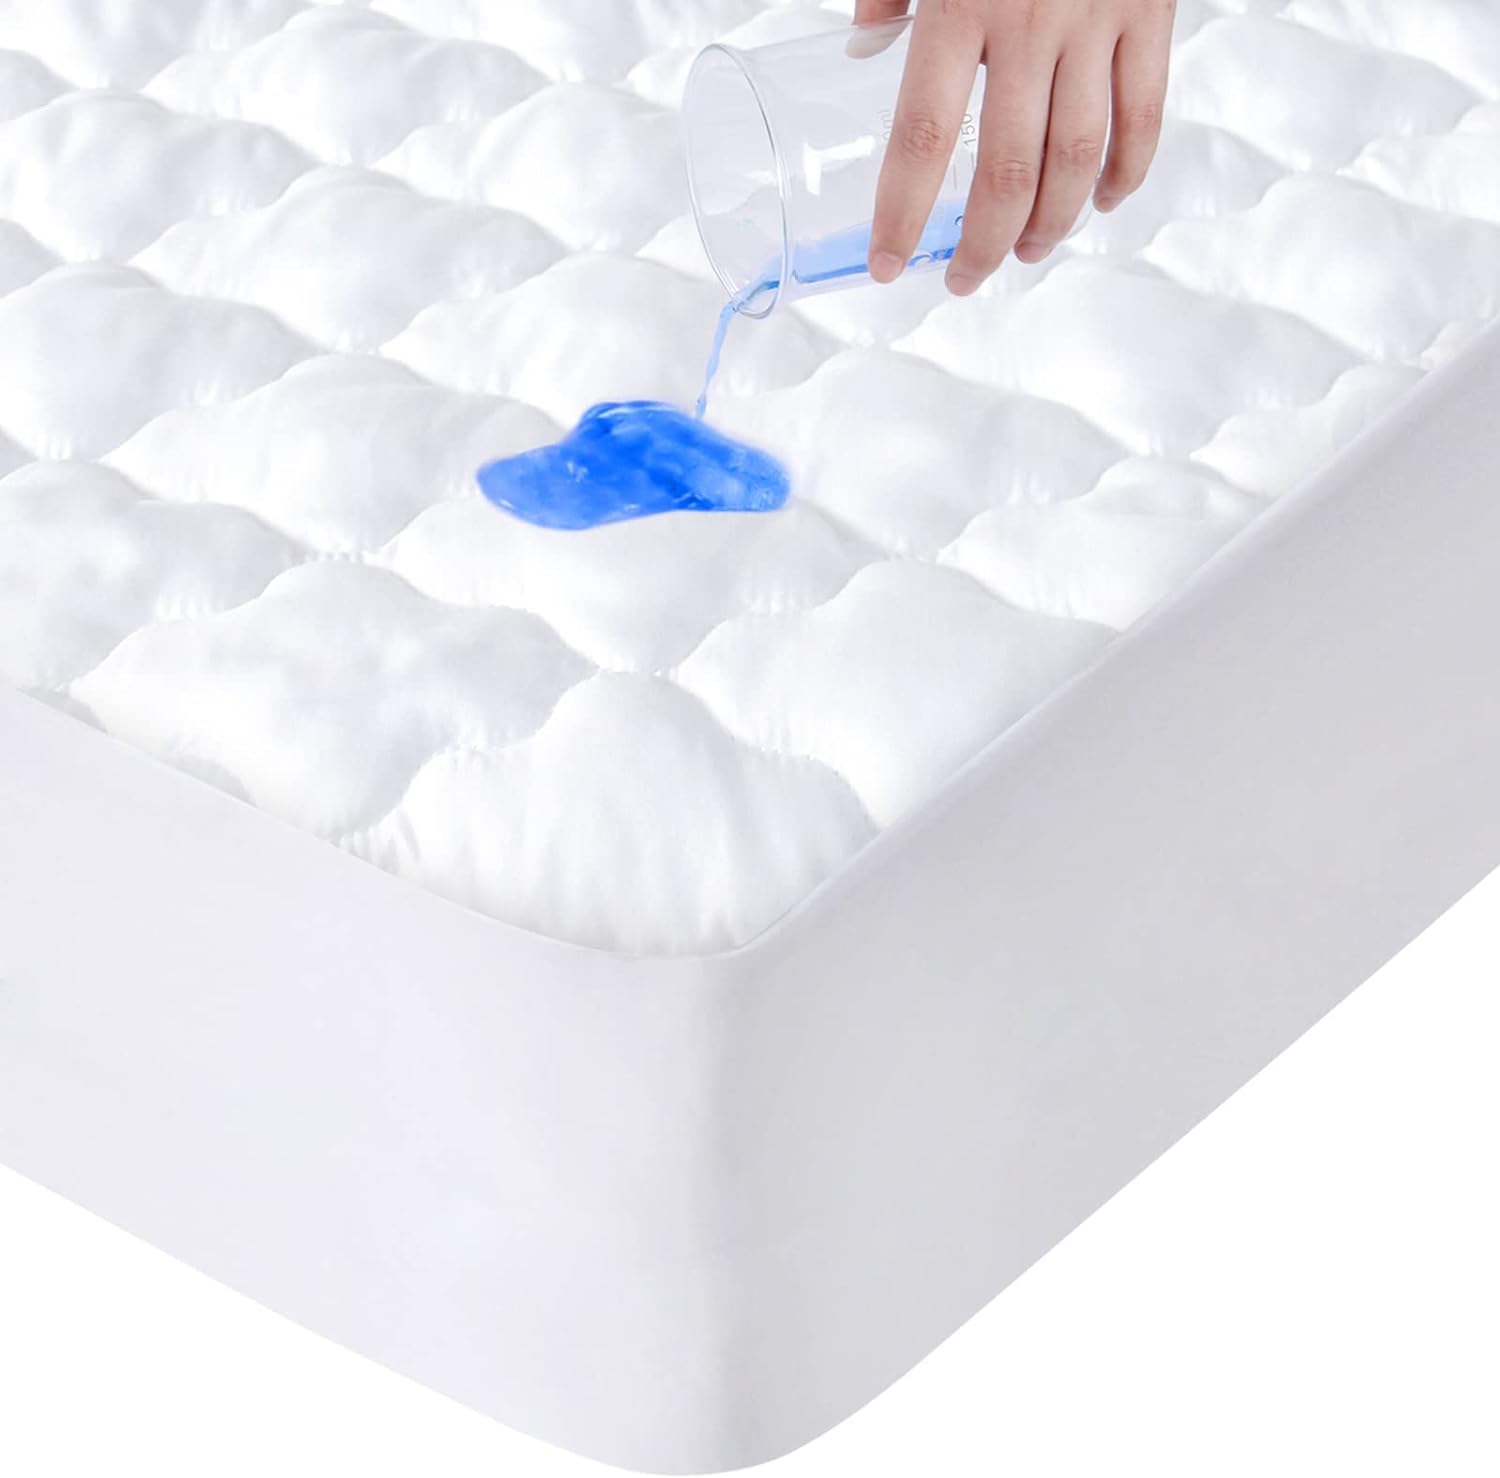 Waterproof Mattress Protector Quilted, Breathable & Noiseless Mattress Pad Cover, Fitted with Deep Pocket - Biloban Online Store